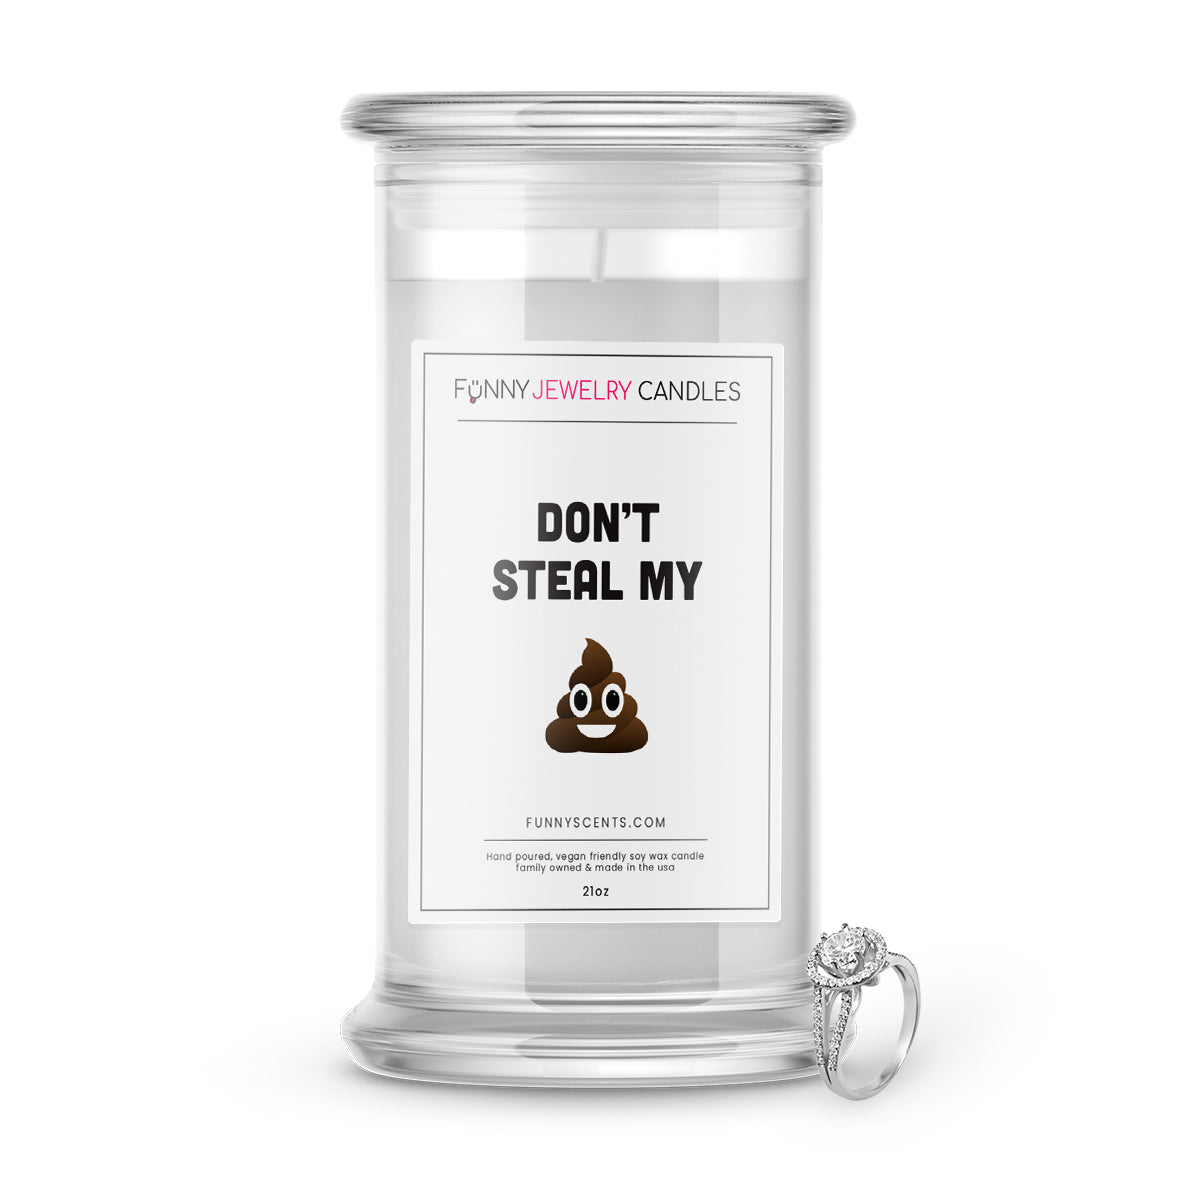 Don't Steal My Shit Jewelry Funny Candles